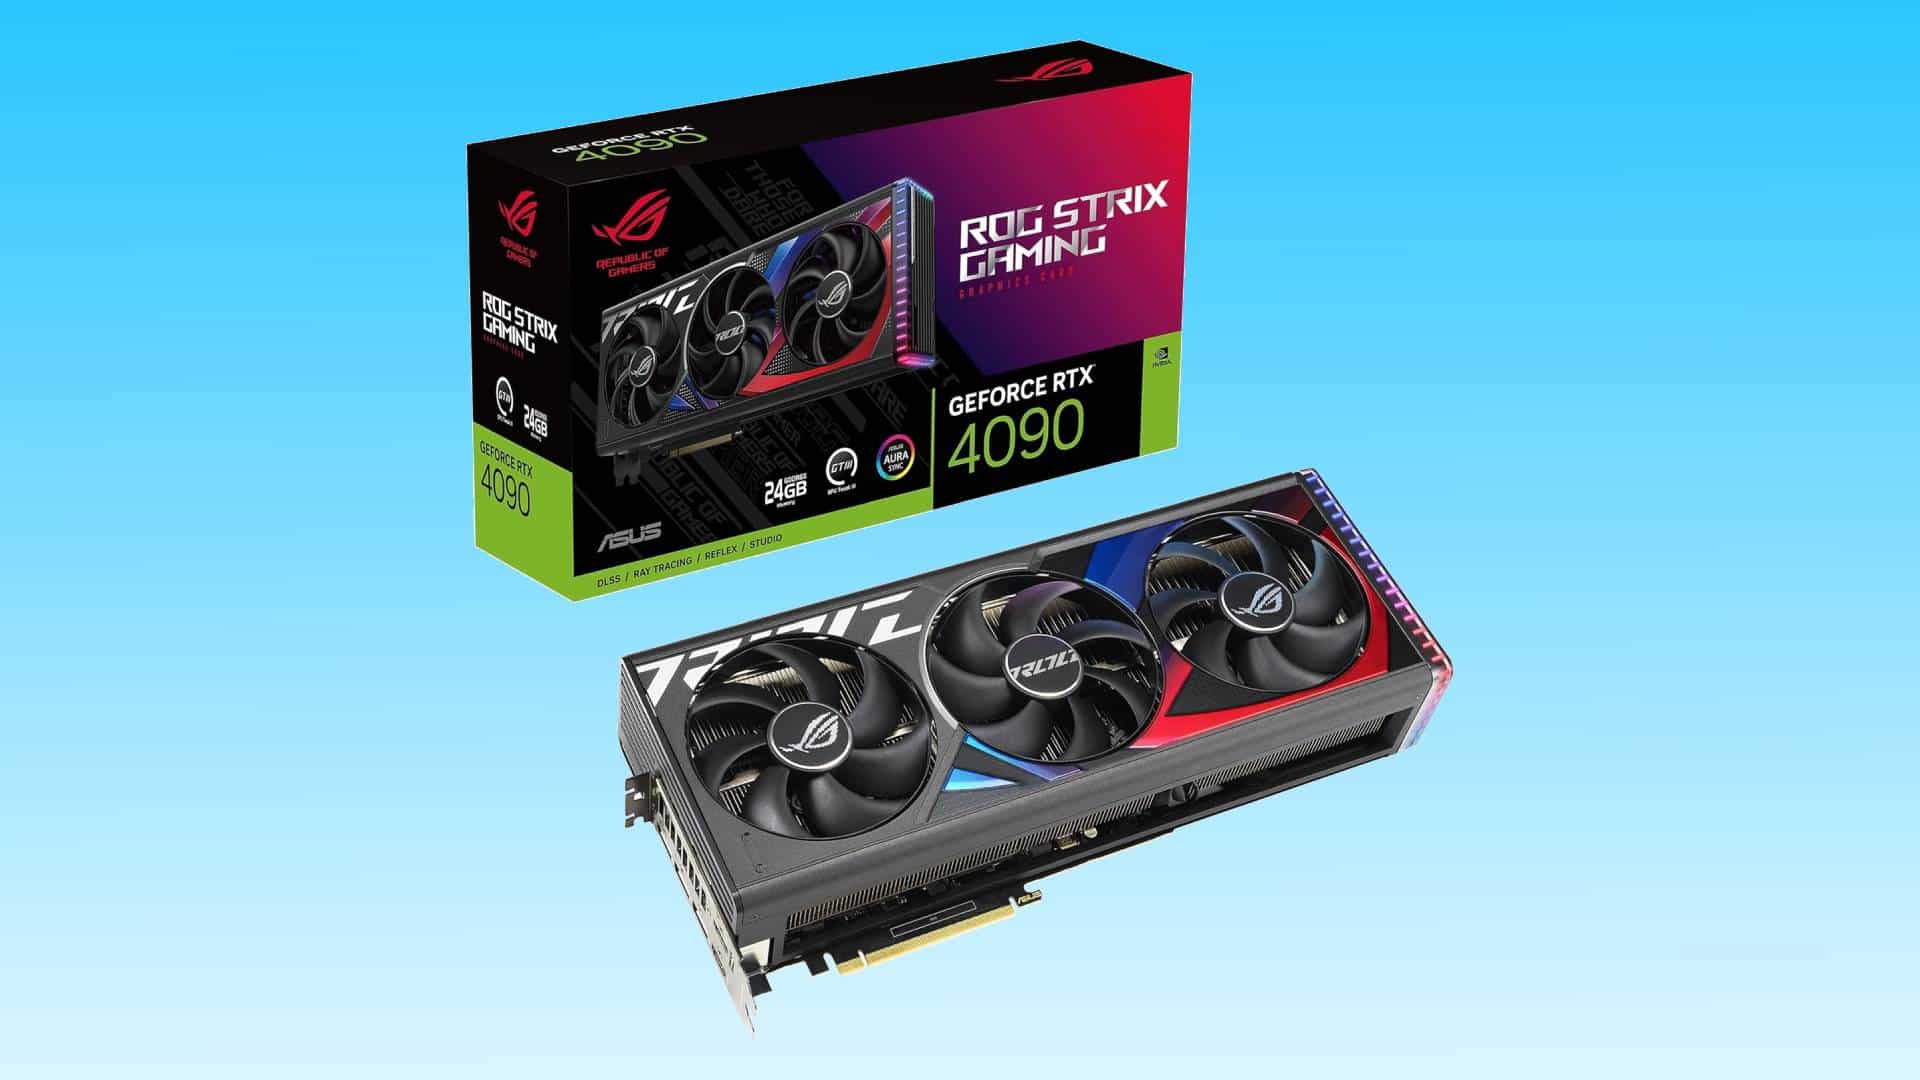 An ASUS ROG Strix RTX 4090 graphics card alongside its packaging box against a blue background, available with an Amazon deal to save $250.